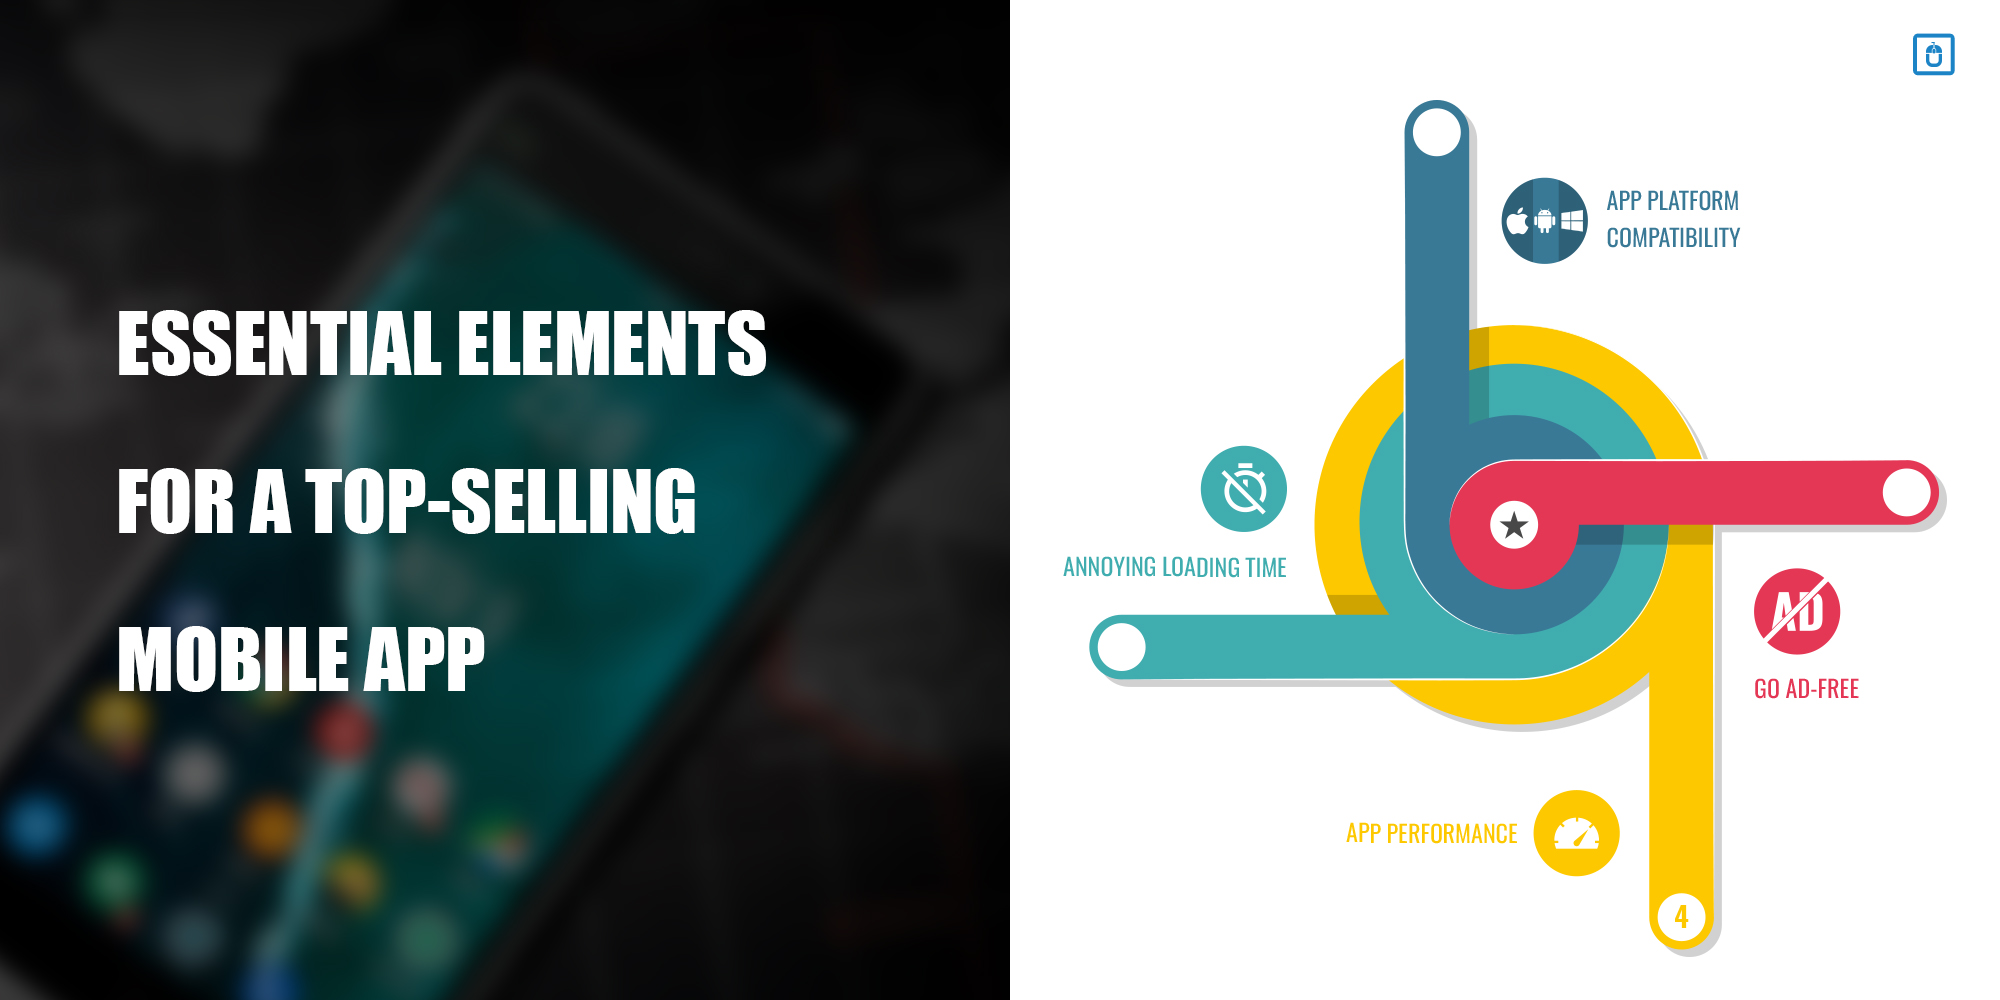 WHAT ARE THE ESSENTIAL ELEMENTS FOR A TOP-SELLING MOBILE APP